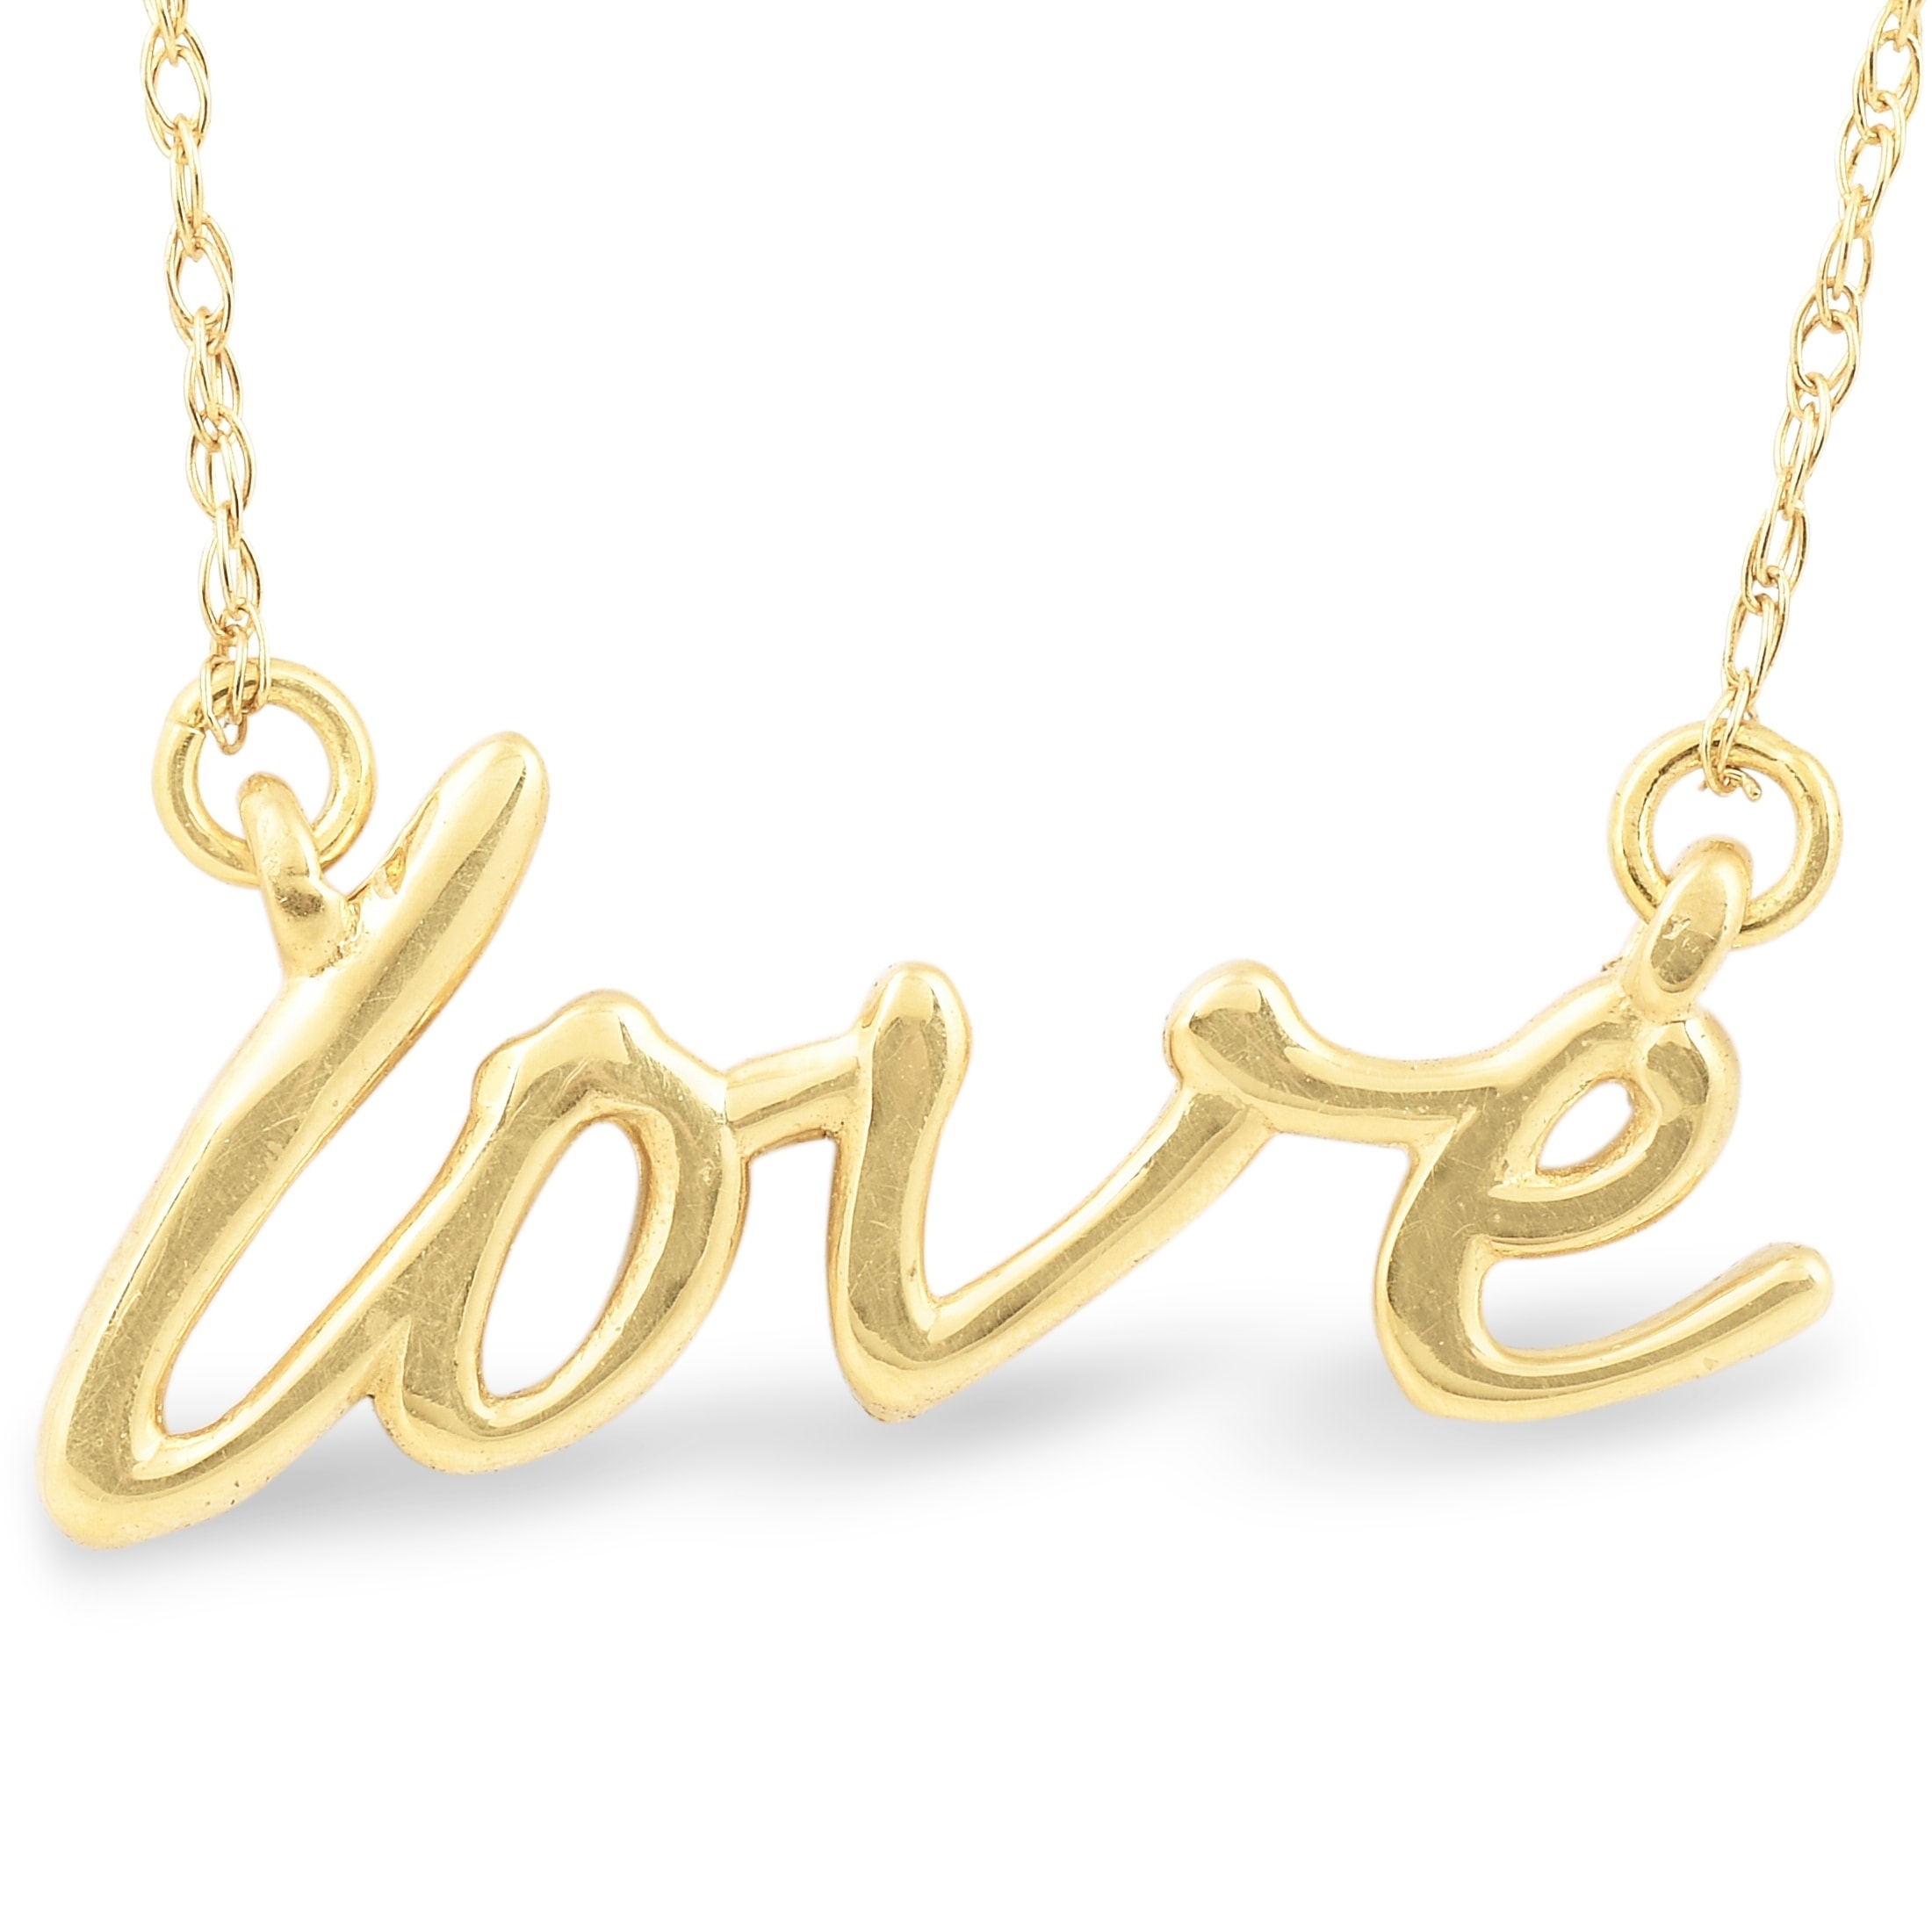 14k Yellow Gold Love Script Pendant Necklace With 18 14k Yellow Gold Chain Overstock